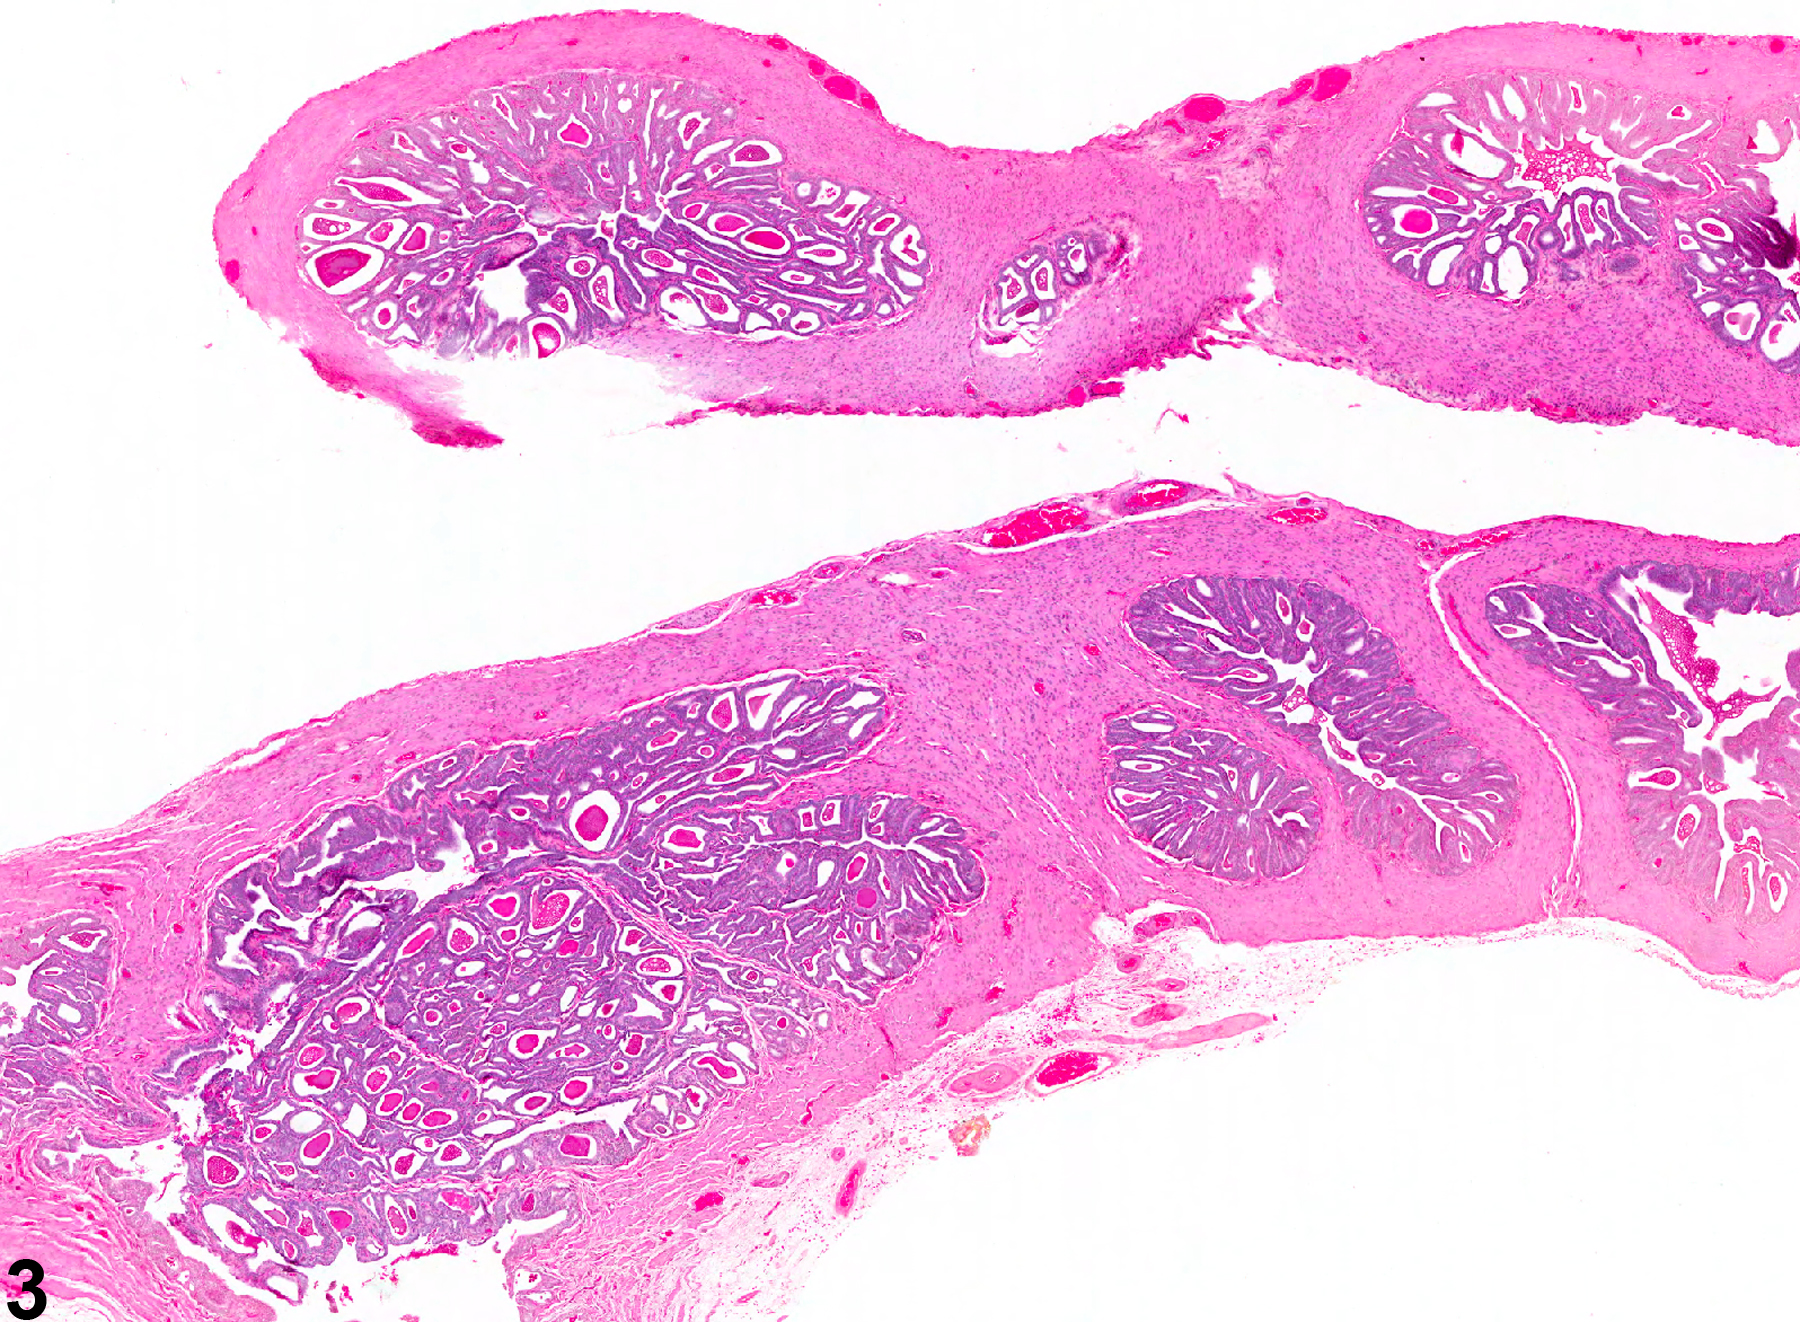 Image of atrophy in the seminal vesicle from a male F344/N rat in an subchronic study